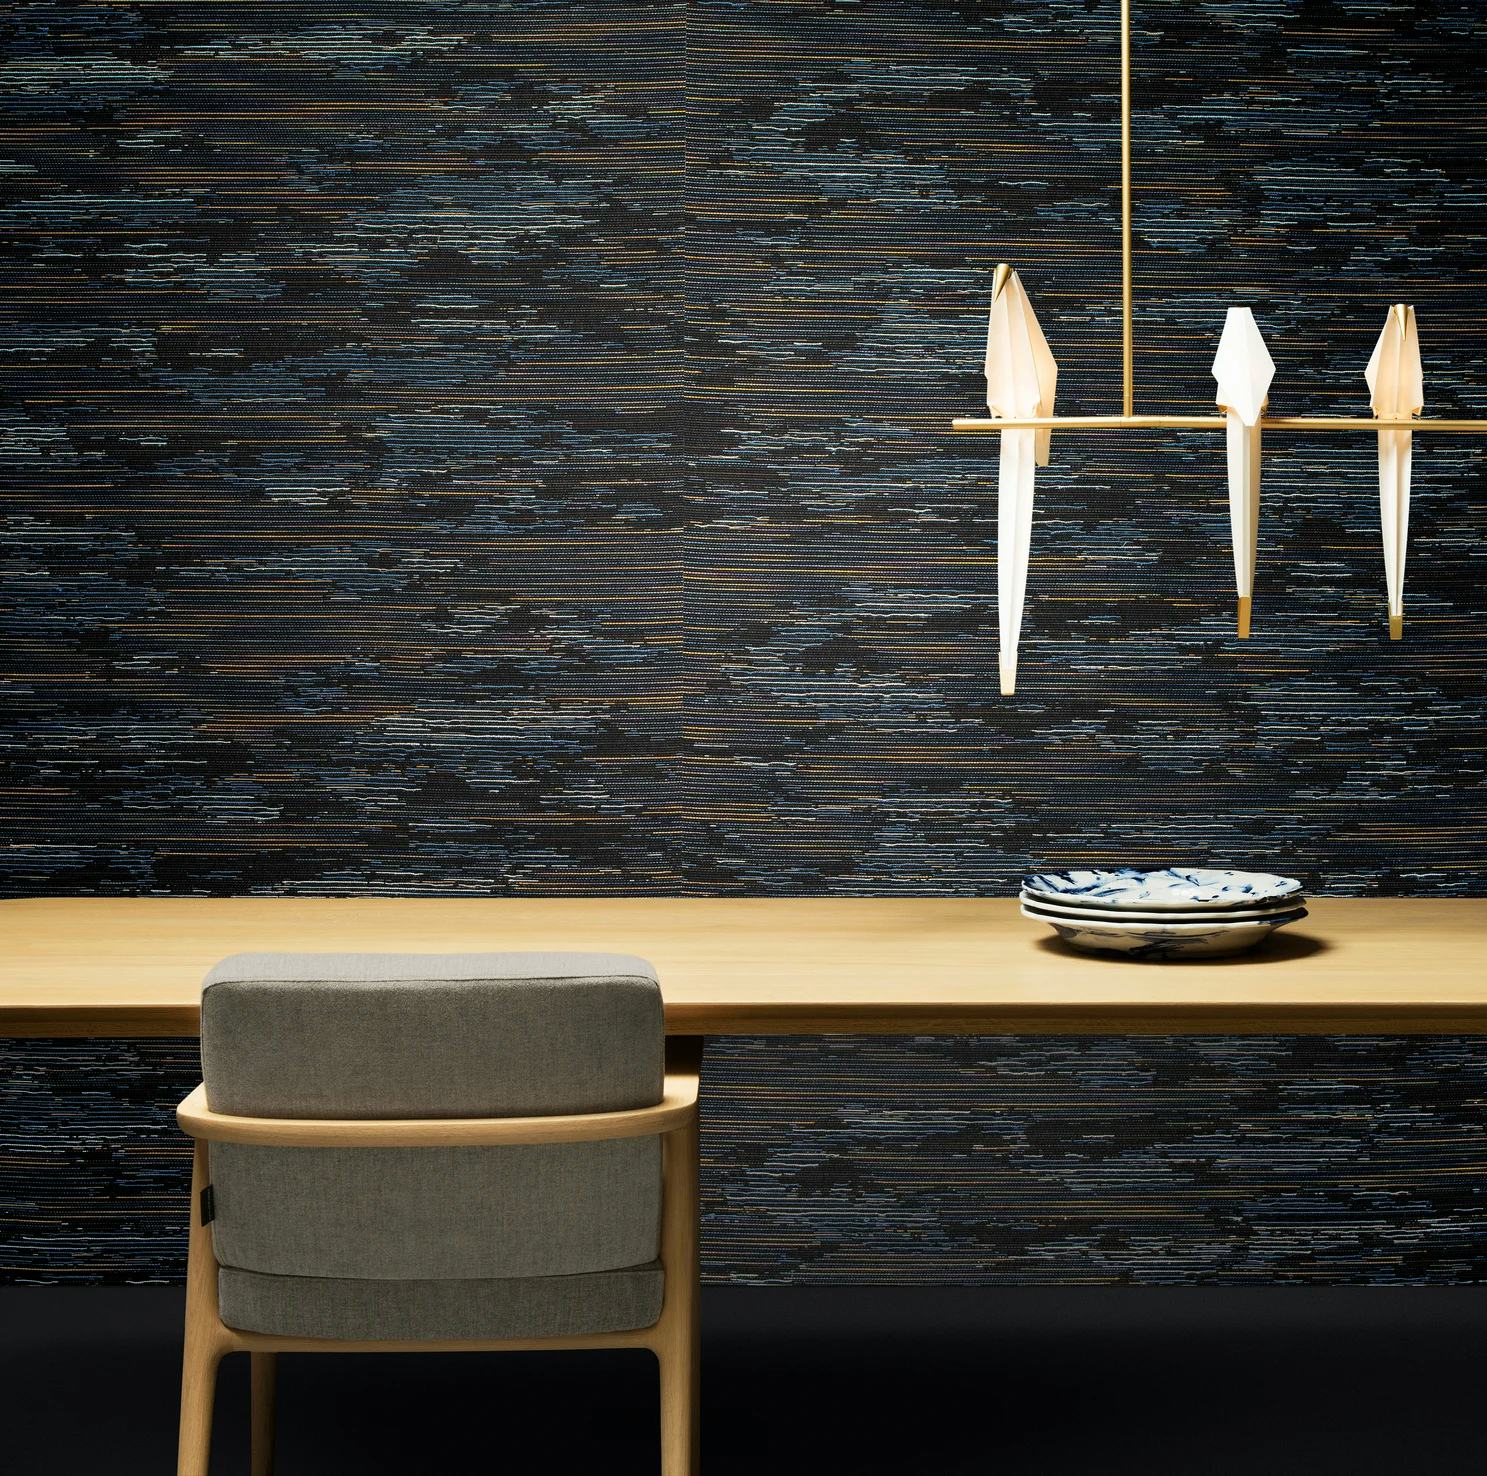 Poetic composition with Zio Dining Chair, Perch Light Branch and Wallcovering Tie Tami